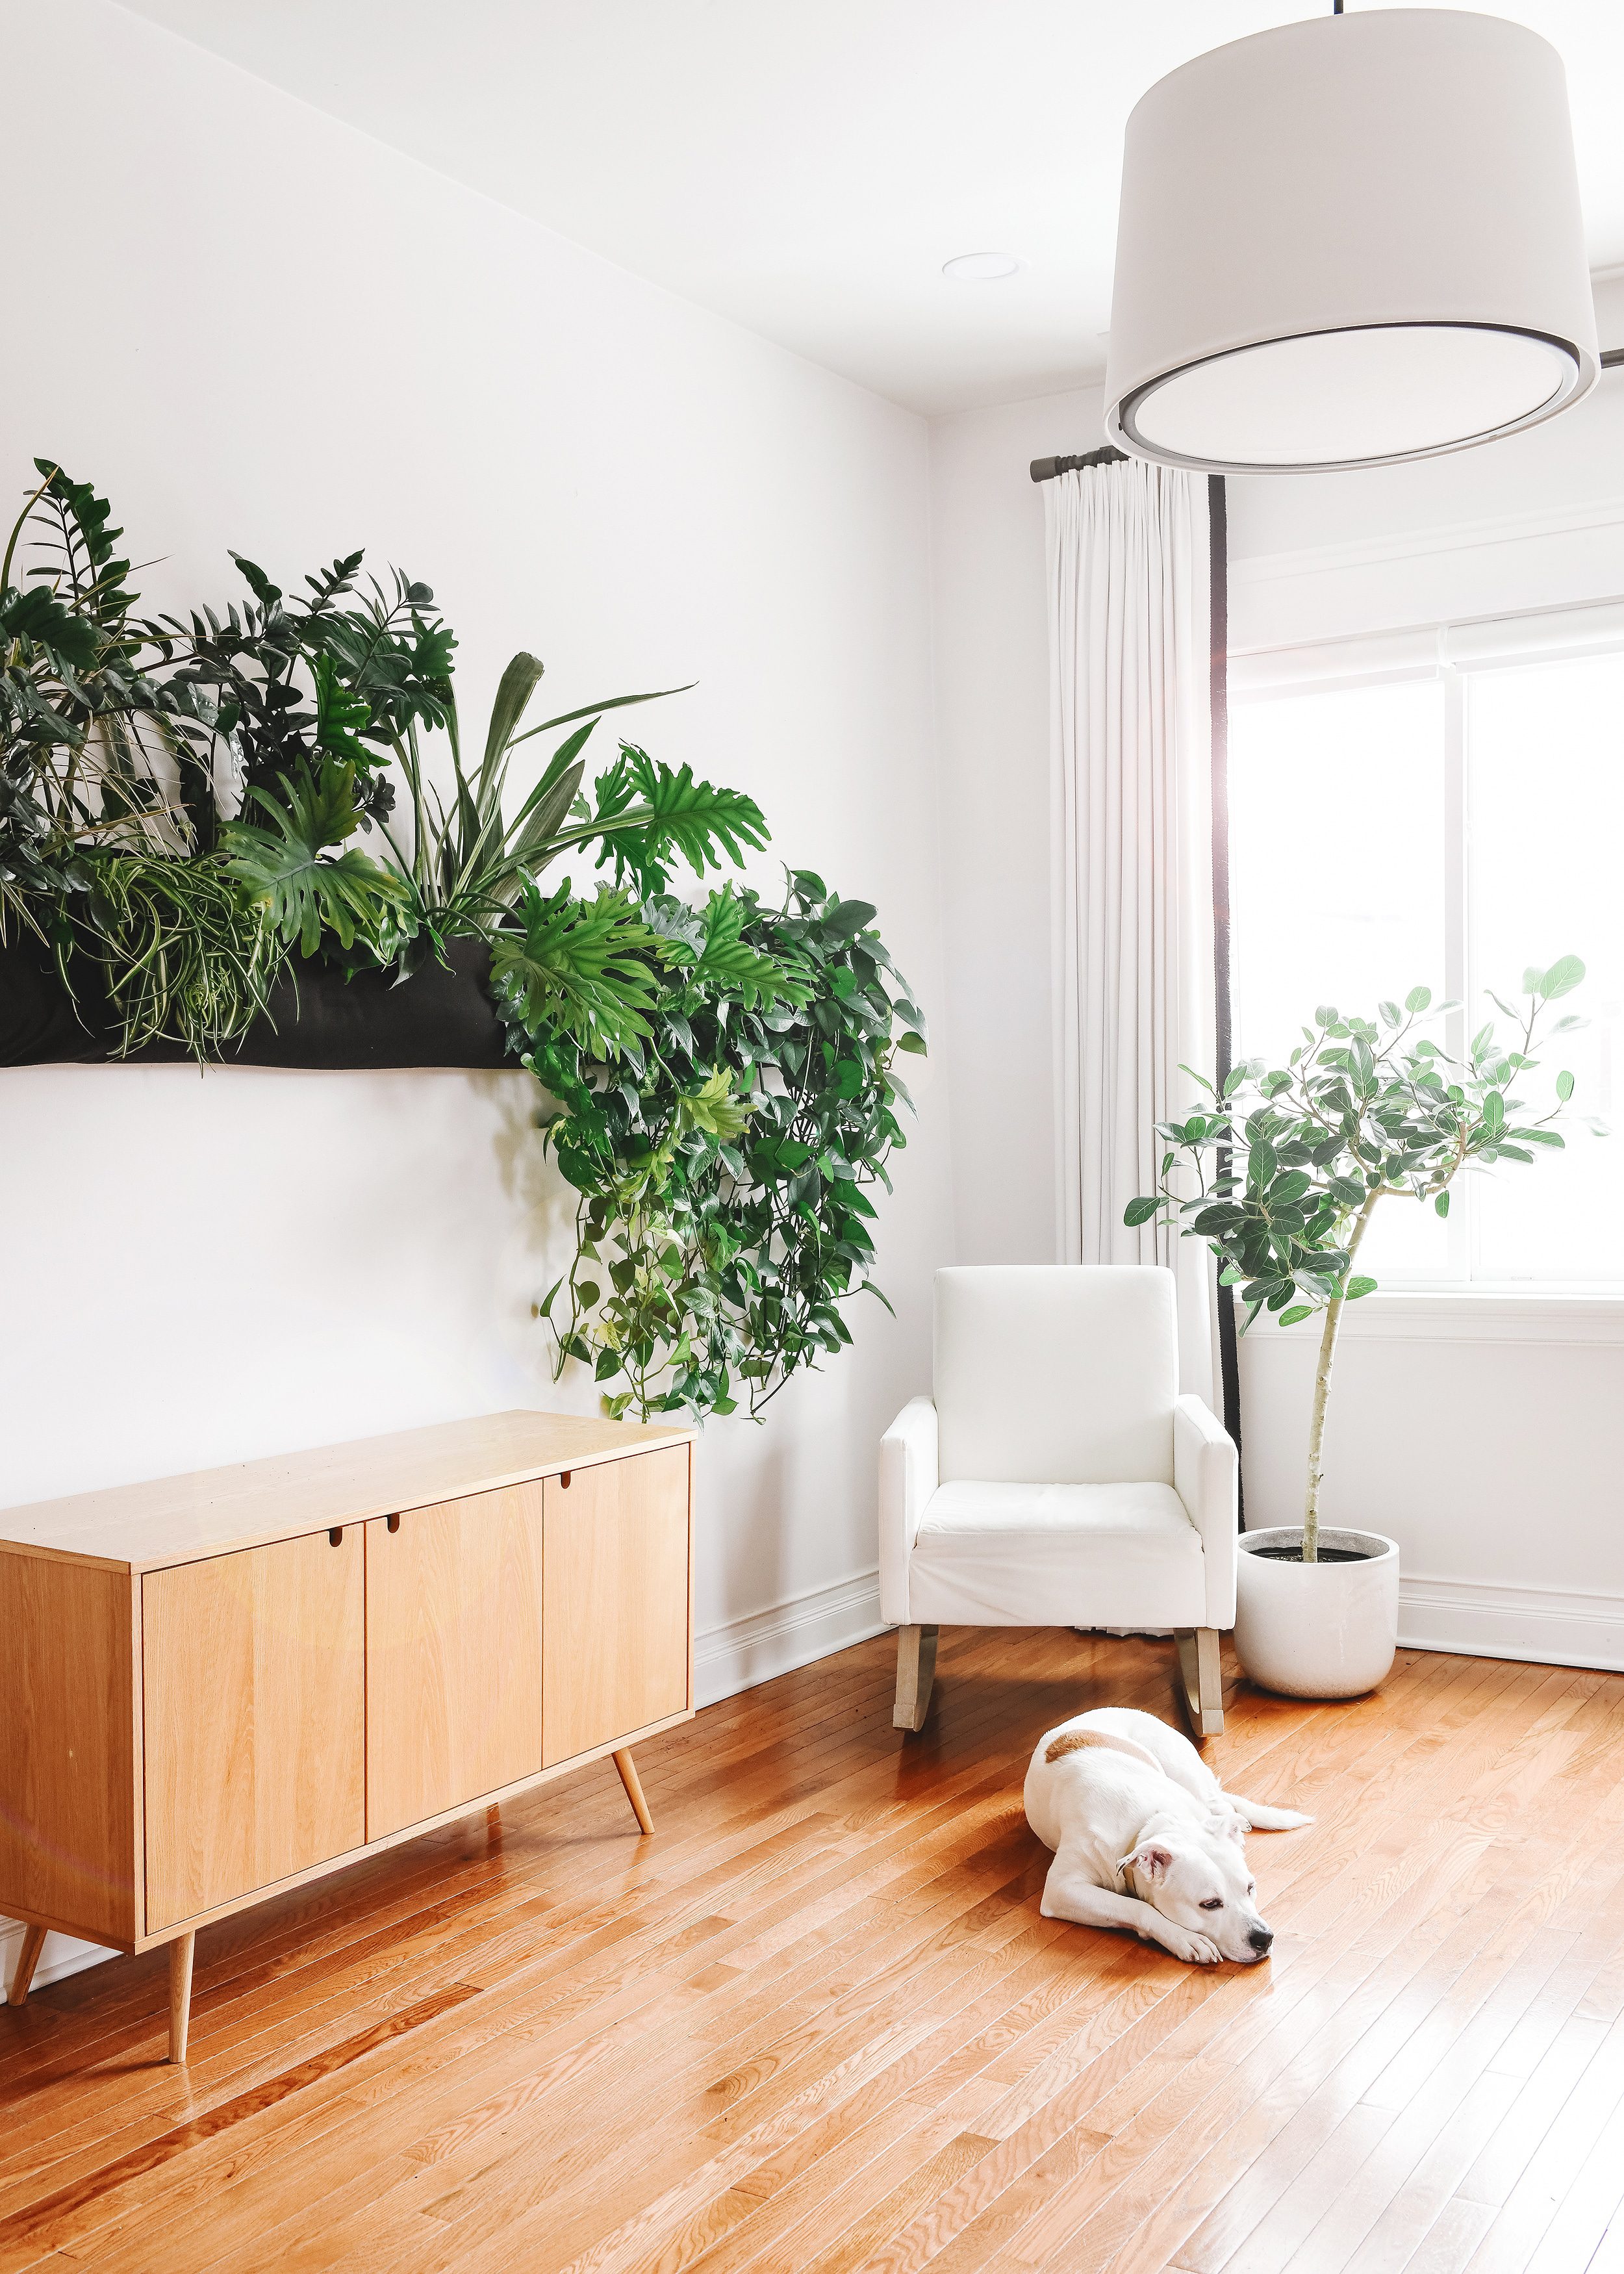 Our Ficus Audrey next to the living wall planter, credenza and Catfish | via Yellow Brick Home